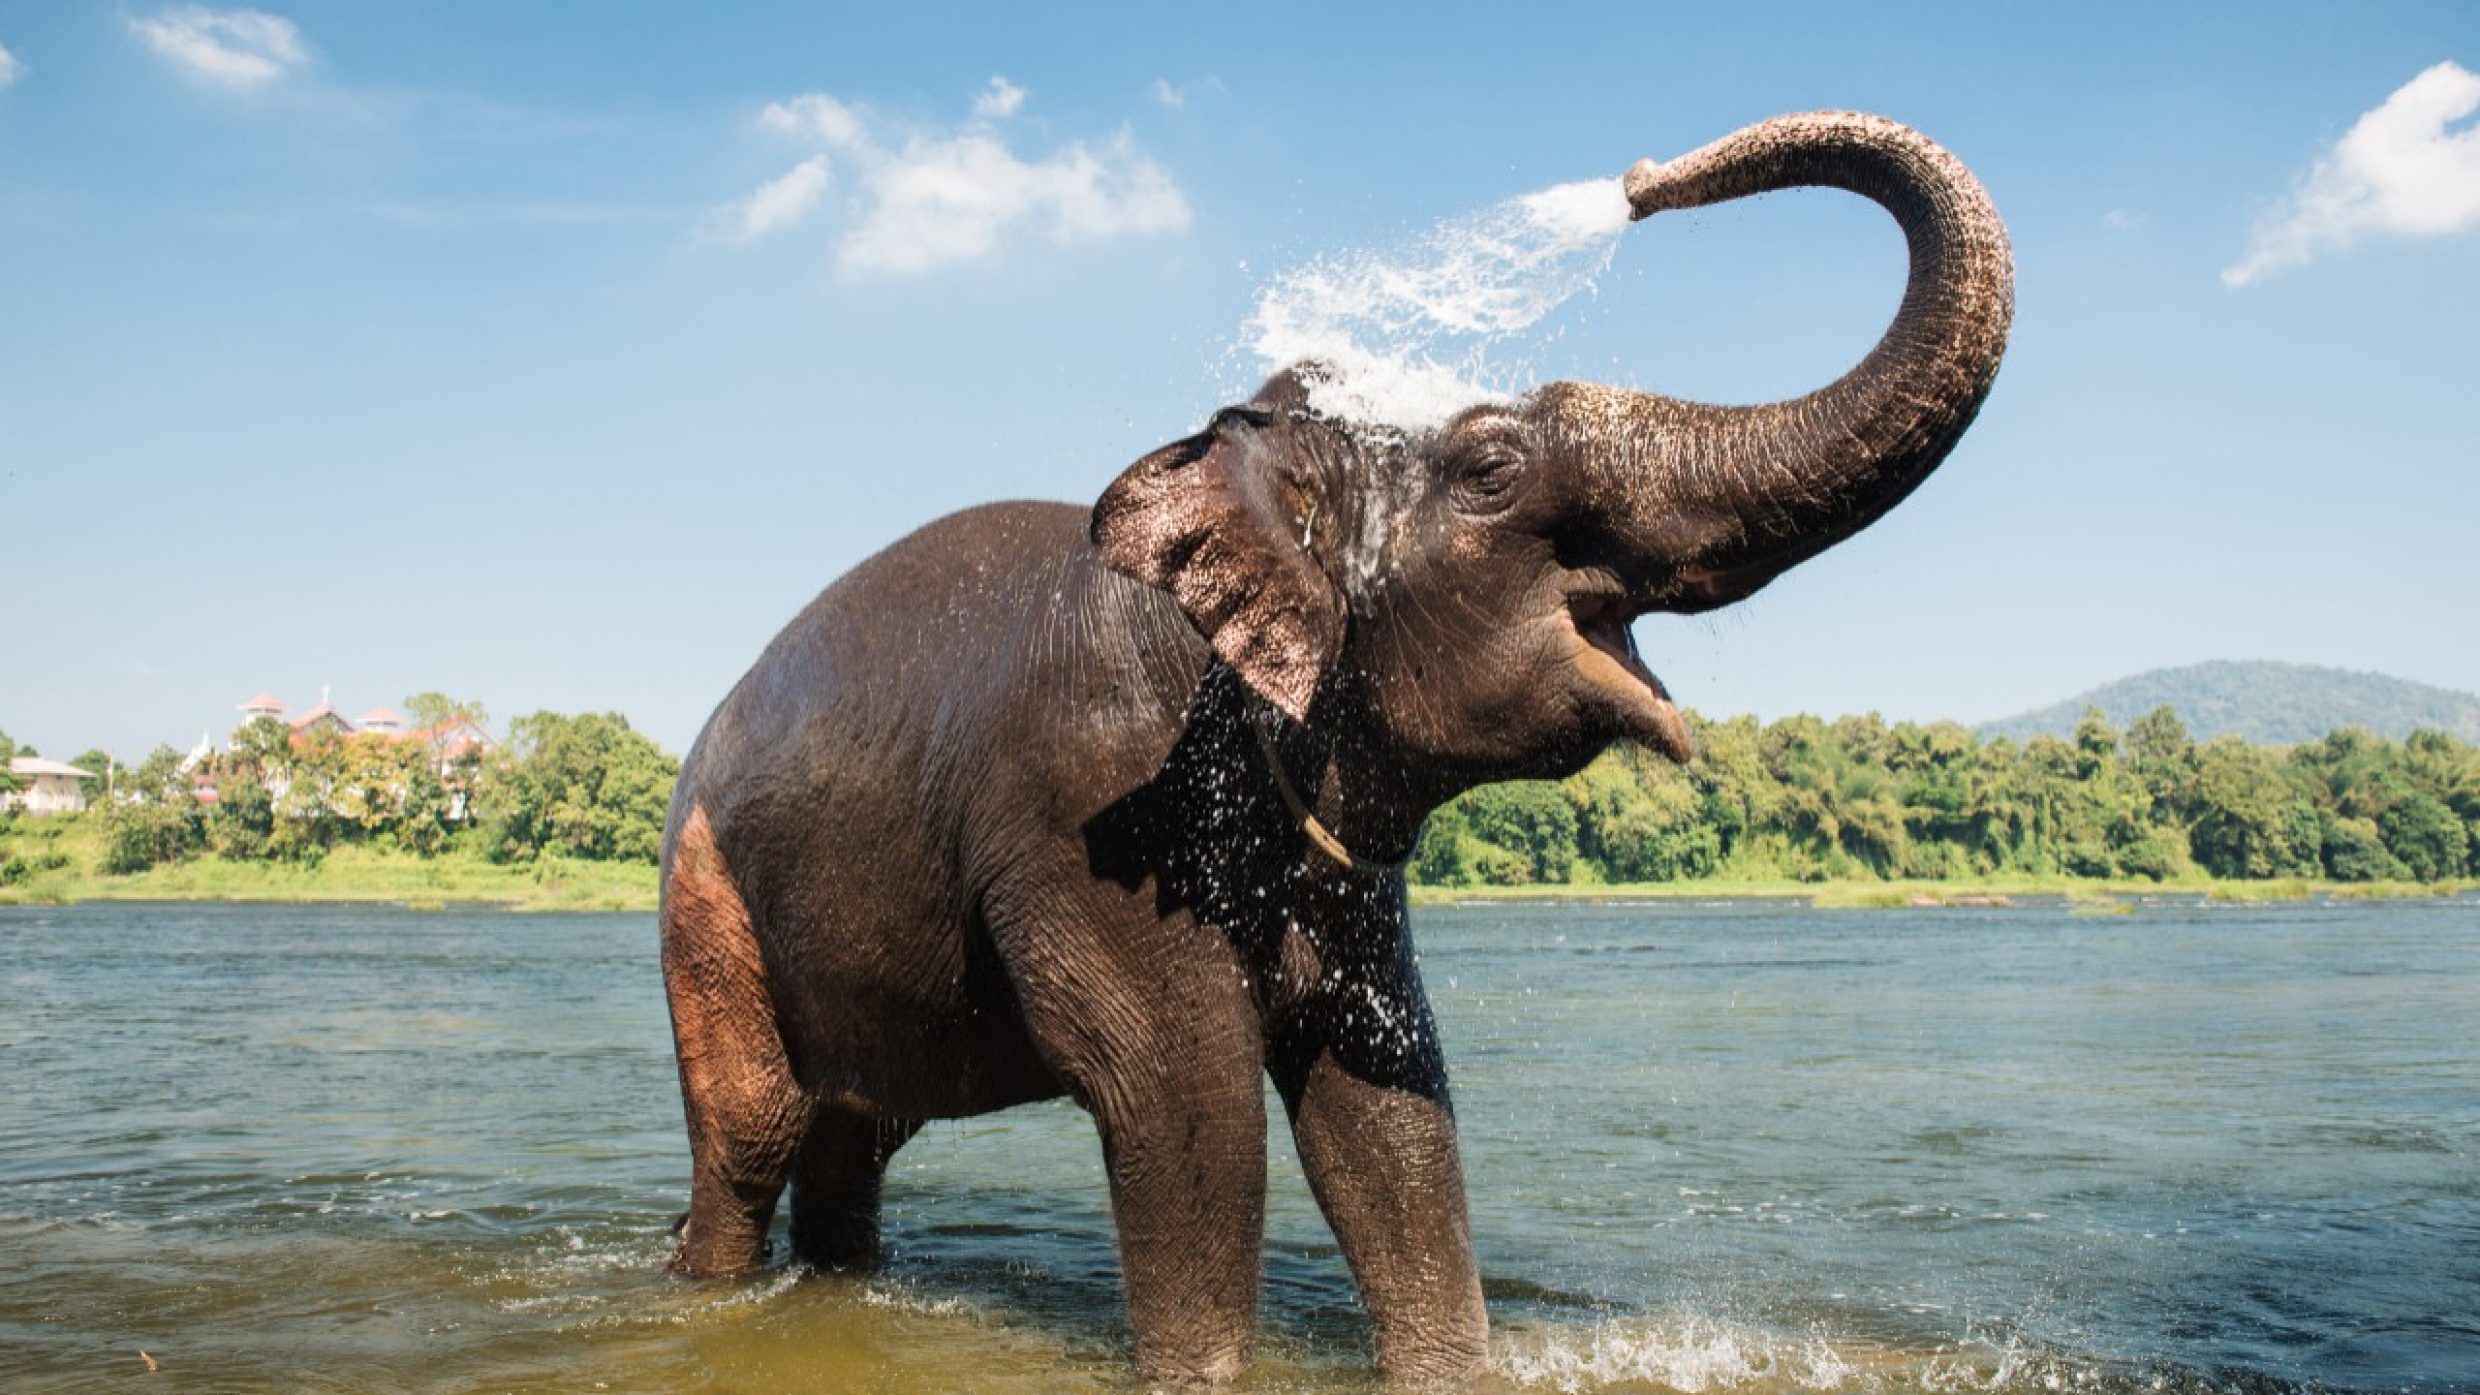 As a general rule: larger creatures have a longer life expectancy. Asian elephants live for up to 86 years, which makes them one of the longest-living land mammals.